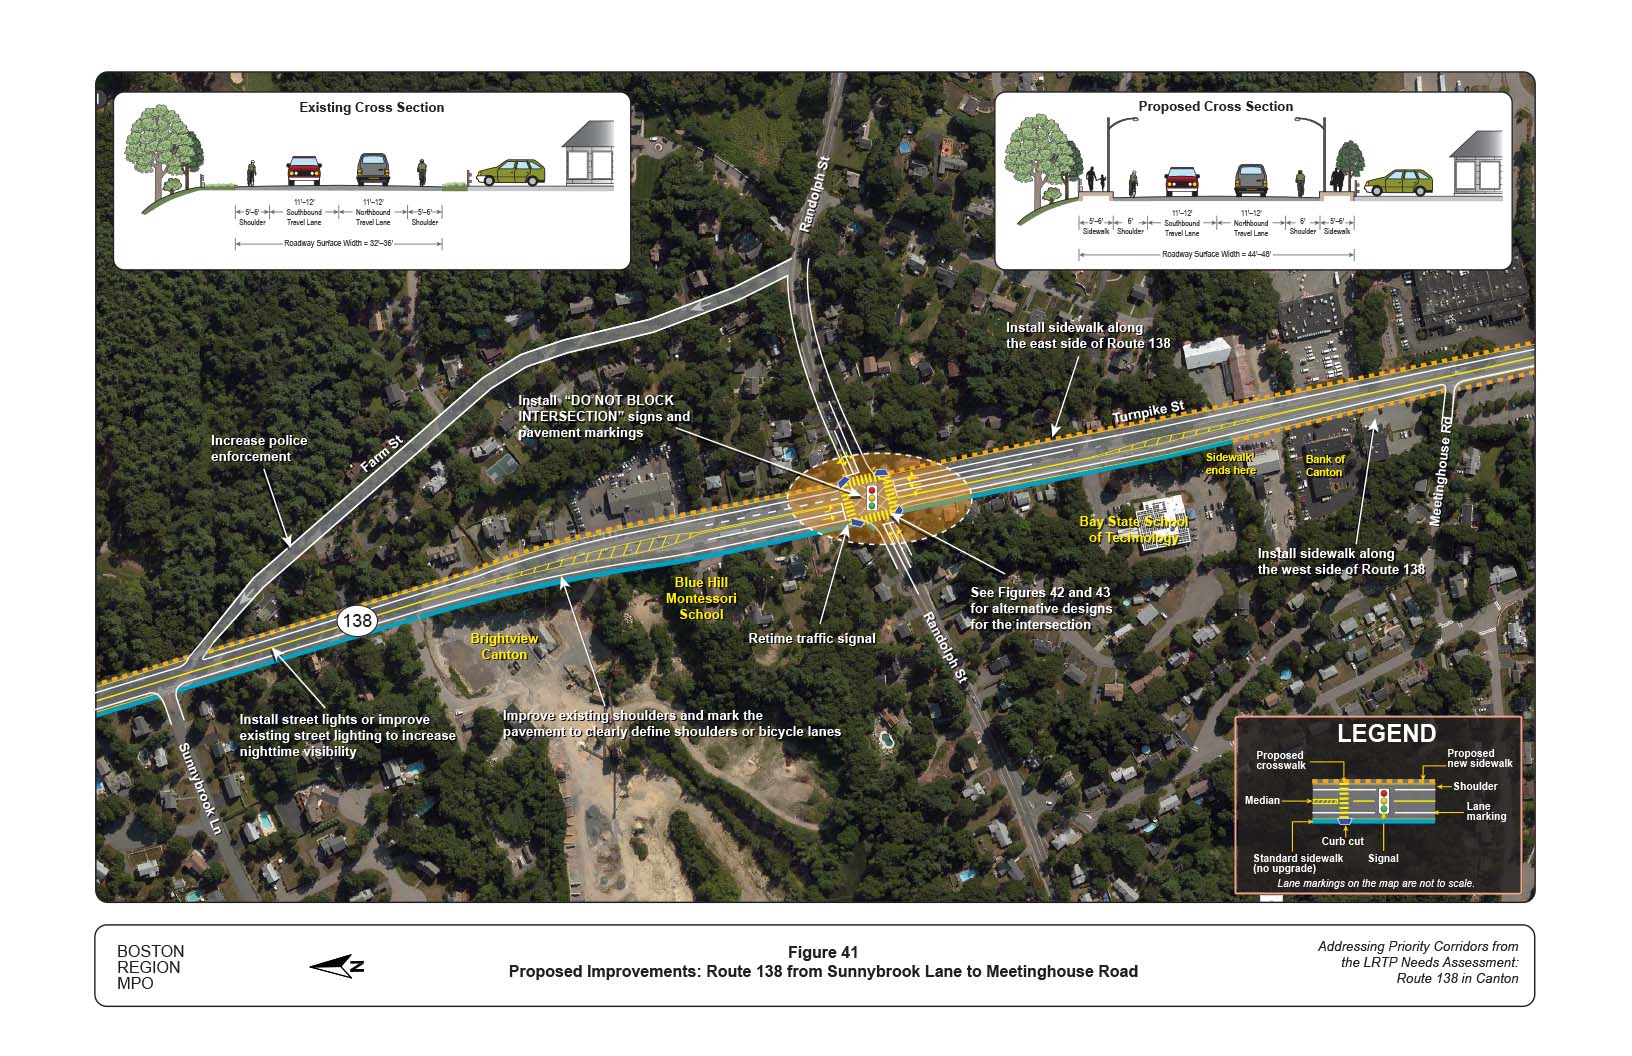 Figure 41 is map of Route 138 at Sunnybrook Lane and Meetinghouse Road with overlays showing the proposed improvements to the roadway and graphics of the current and proposed cross section of the roadway.